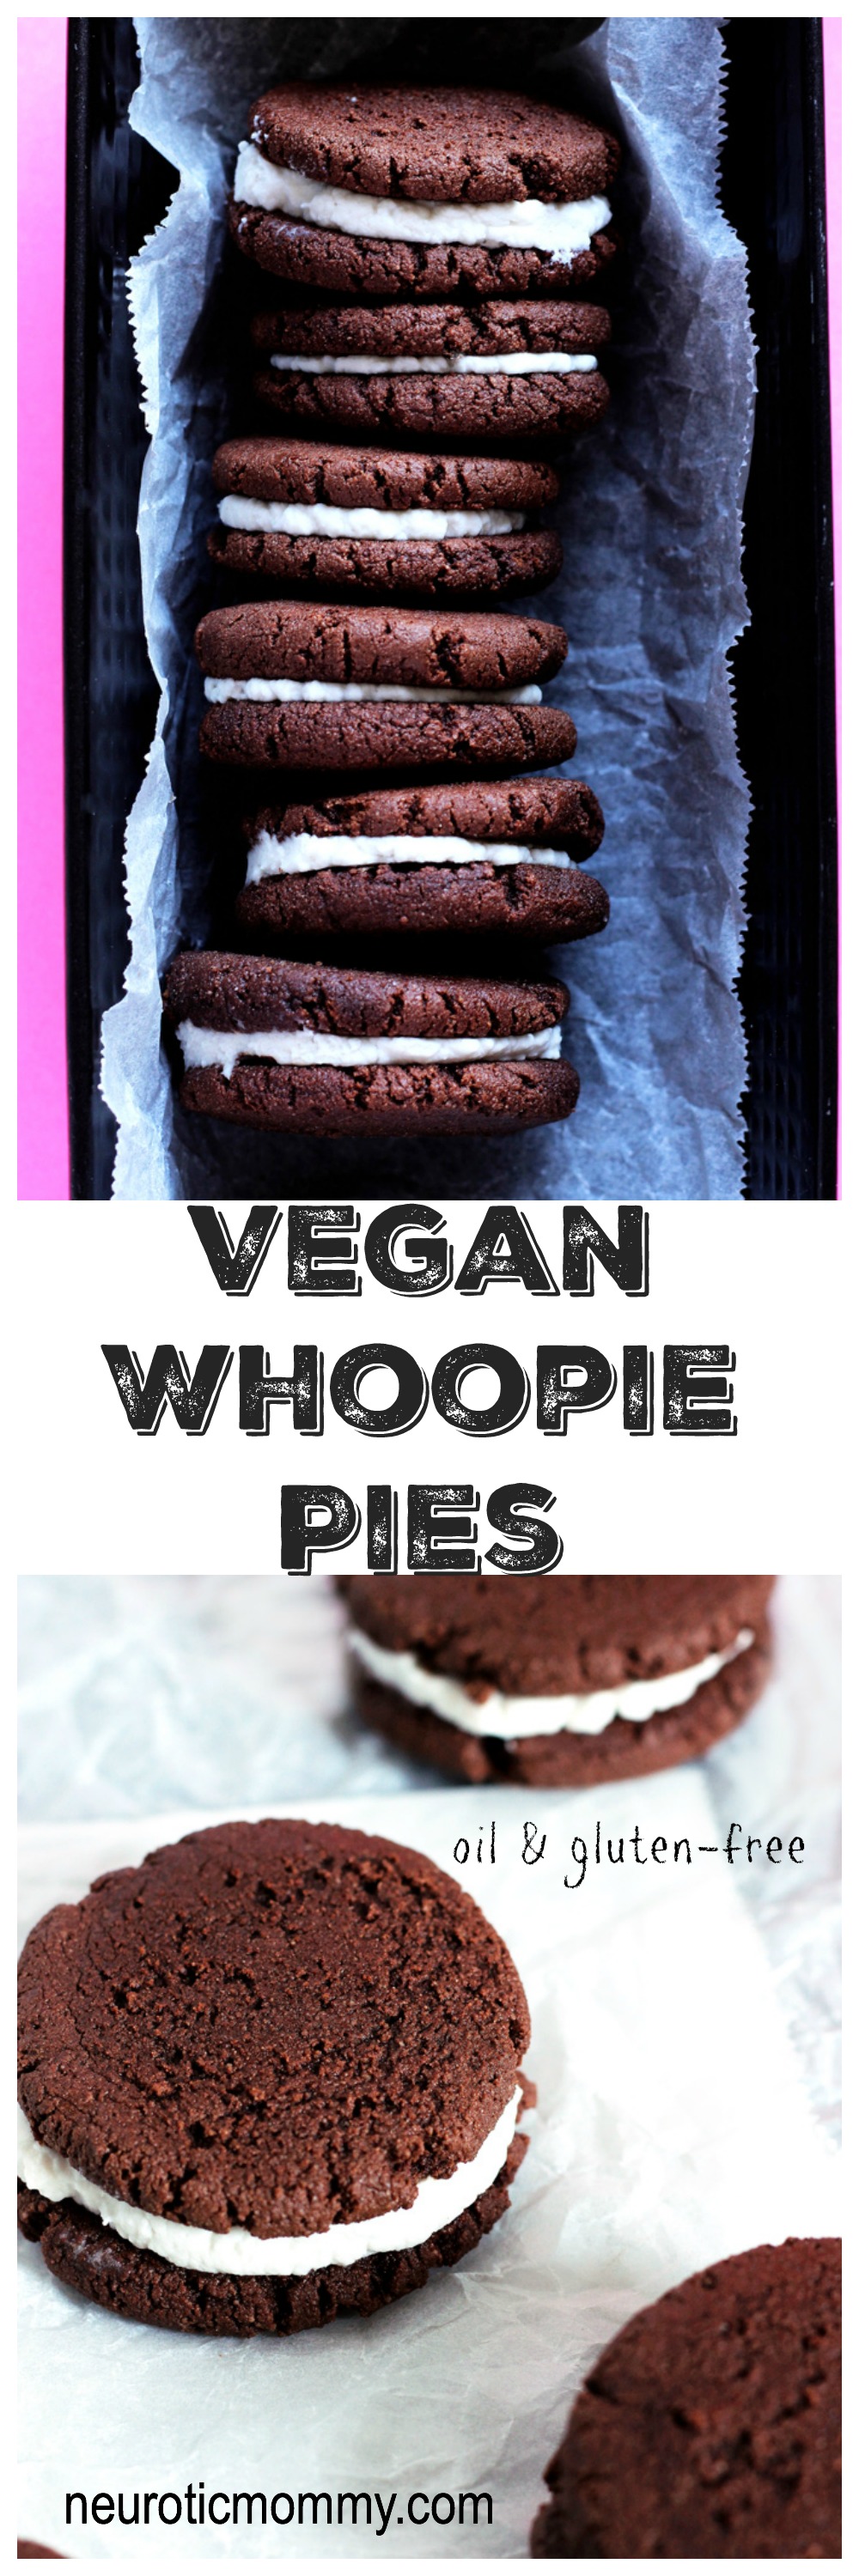 Vegan Whoopie Pies - Easy 4 ingredient snack filled with sweet coconut whipped cream and a melty dreamy chocolate cookie. NeuroticMommy.com #vegan #glutenfree